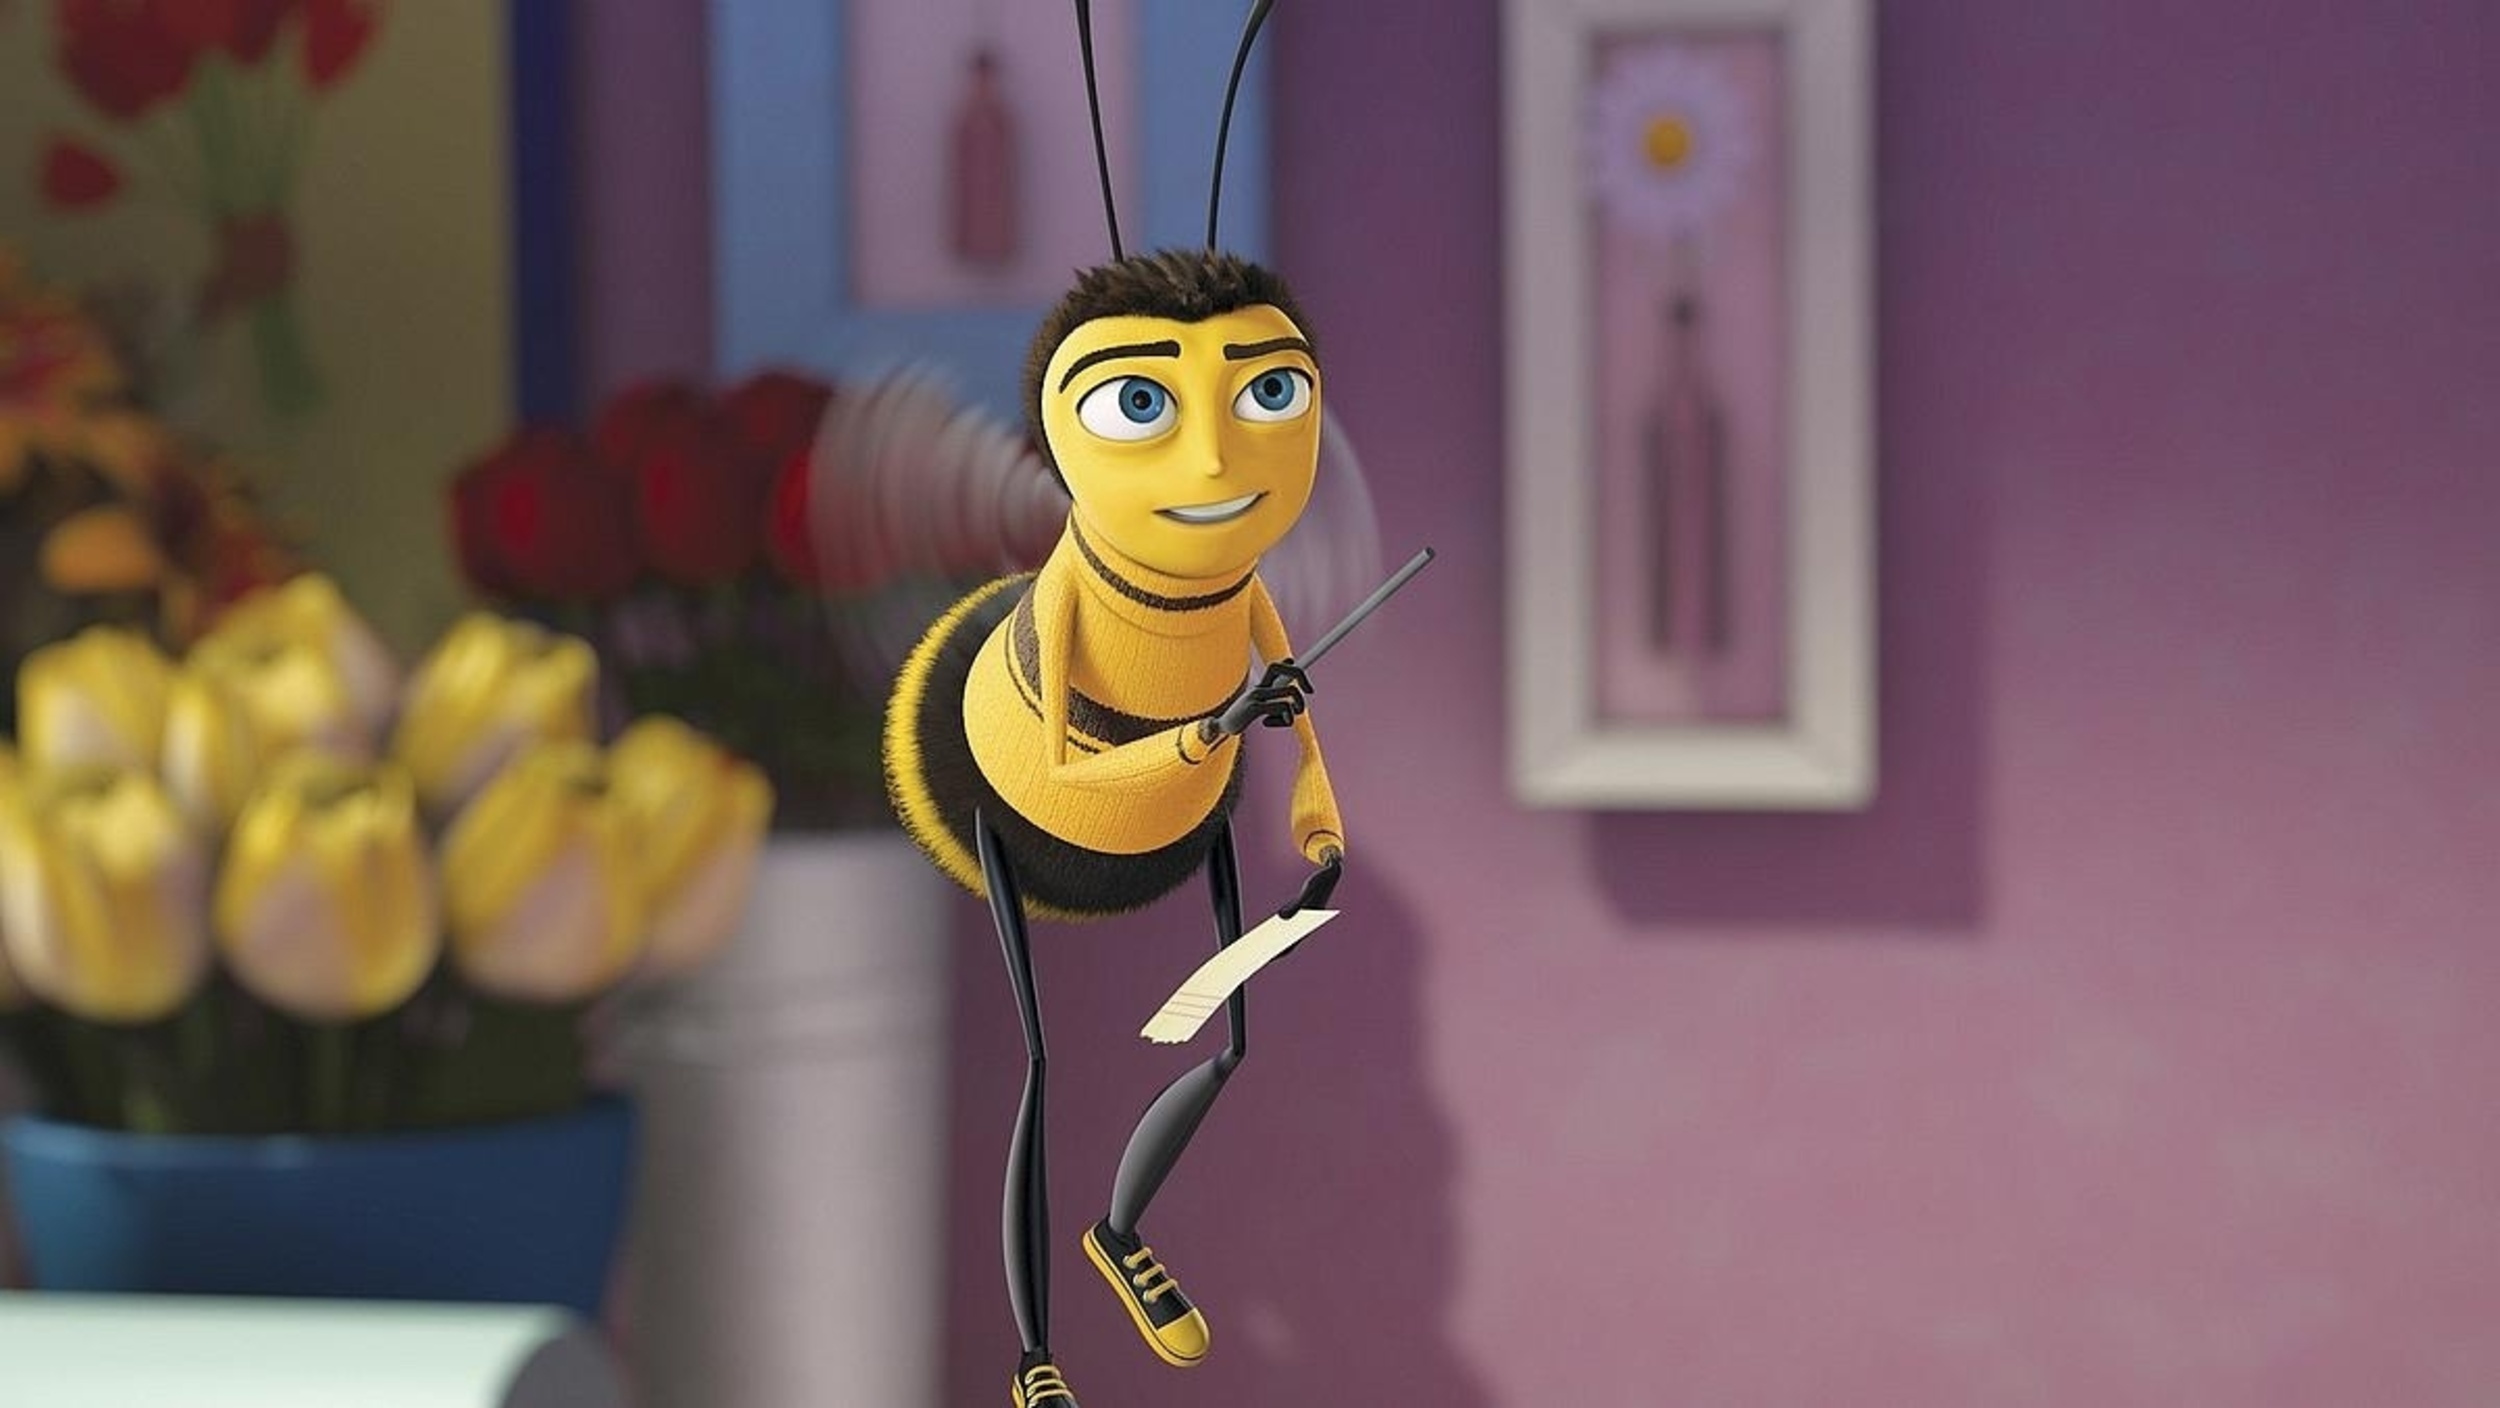 <p><span>Jerry Seinfeld didn’t have to do anything after his sitcom left the air in 1998, but he managed to deliver another notable character with Barry B. Benson in <em>Bee Movie</em>, all while teaching the importance and impact of bees on the world.</span></p><p><a href='https://www.msn.com/en-us/community/channel/vid-cj9pqbr0vn9in2b6ddcd8sfgpfq6x6utp44fssrv6mc2gtybw0us'>Follow us on MSN to see more of our exclusive entertainment content.</a></p>